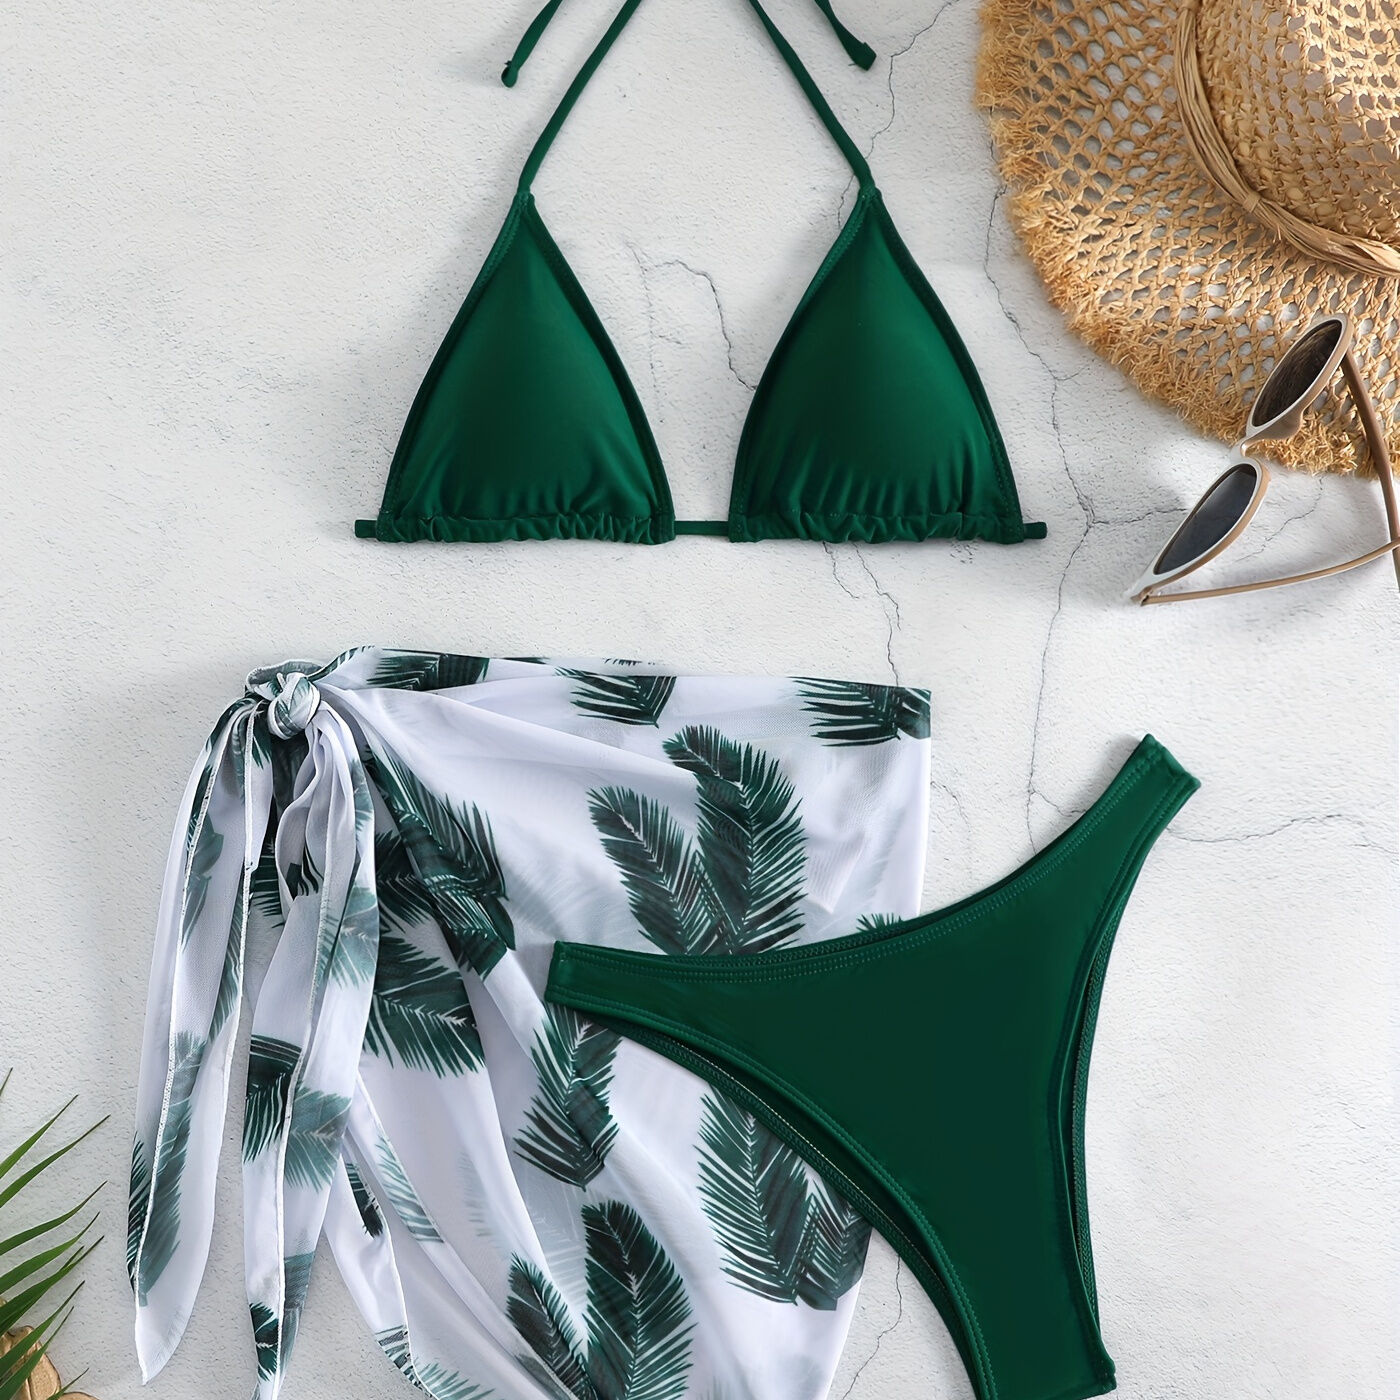 Temu 3-piece Feather Print Bikini Sets, Halter Neck Tie Back Backless High Cut With Cover Up Wrap Swimsuit, Women's Swimwear & Clothing Green S(4)